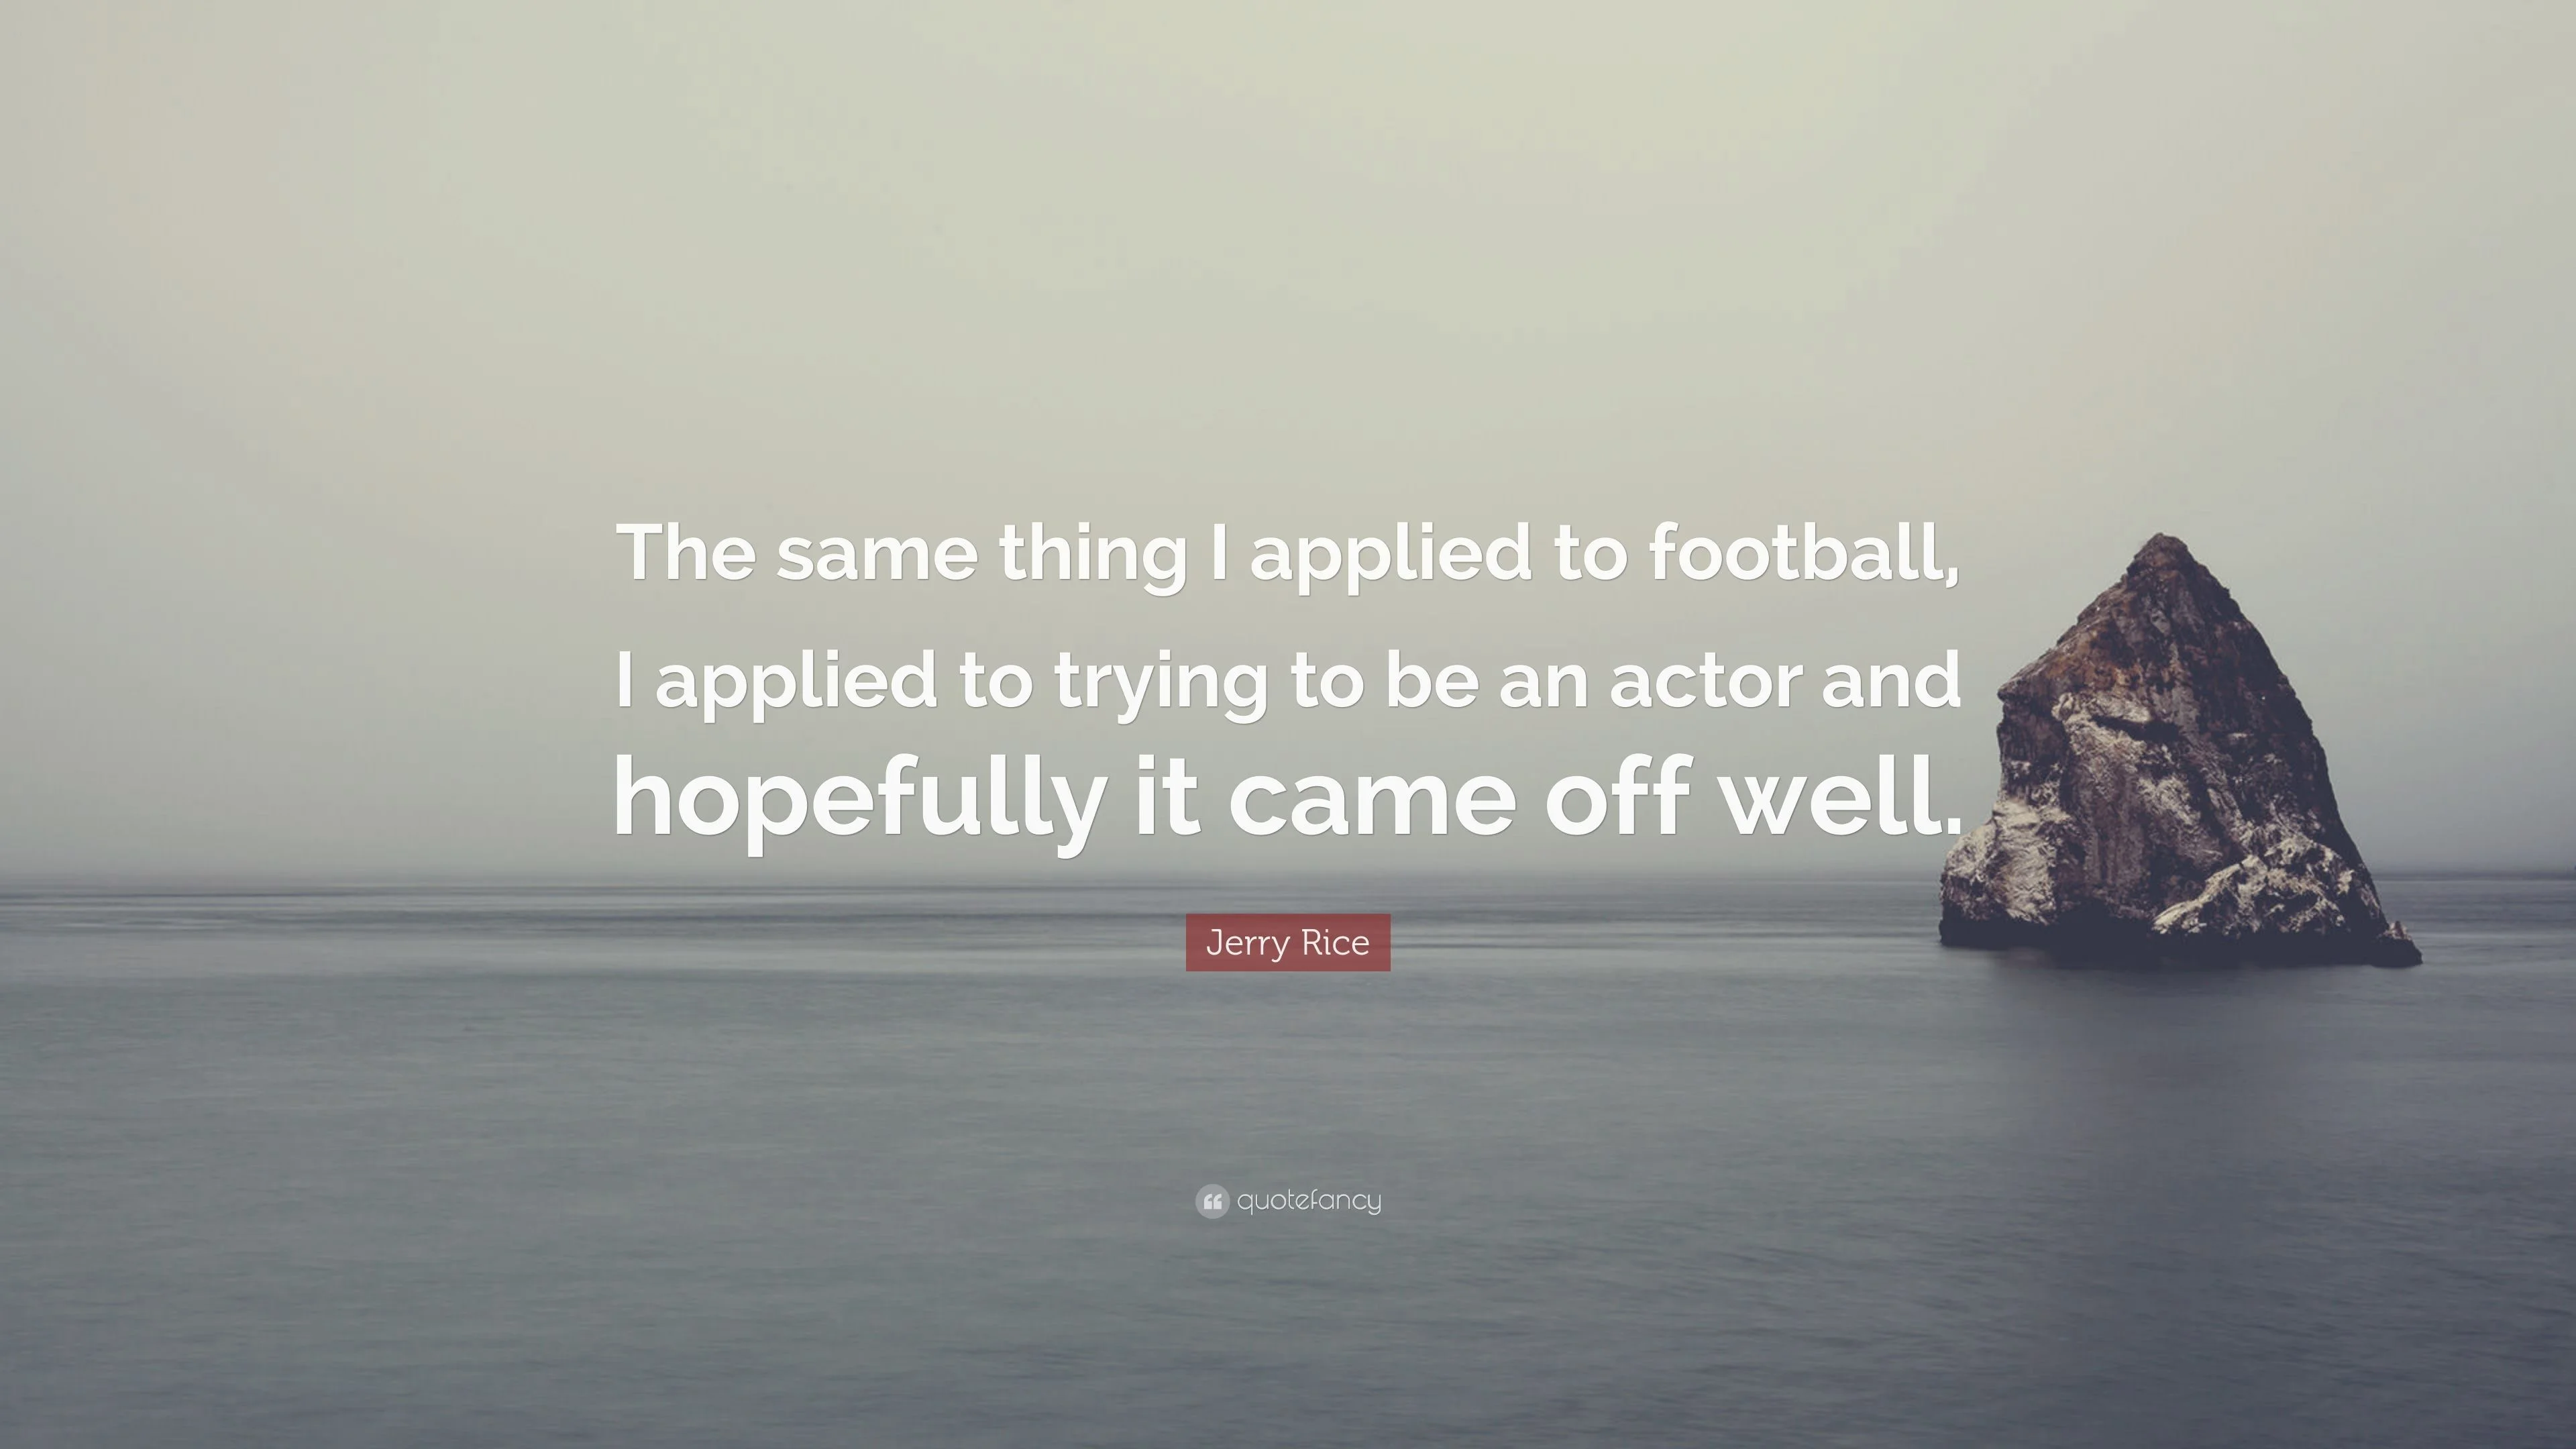 Jerry Rice Quote: "The same thing I applied to football, I applied to....